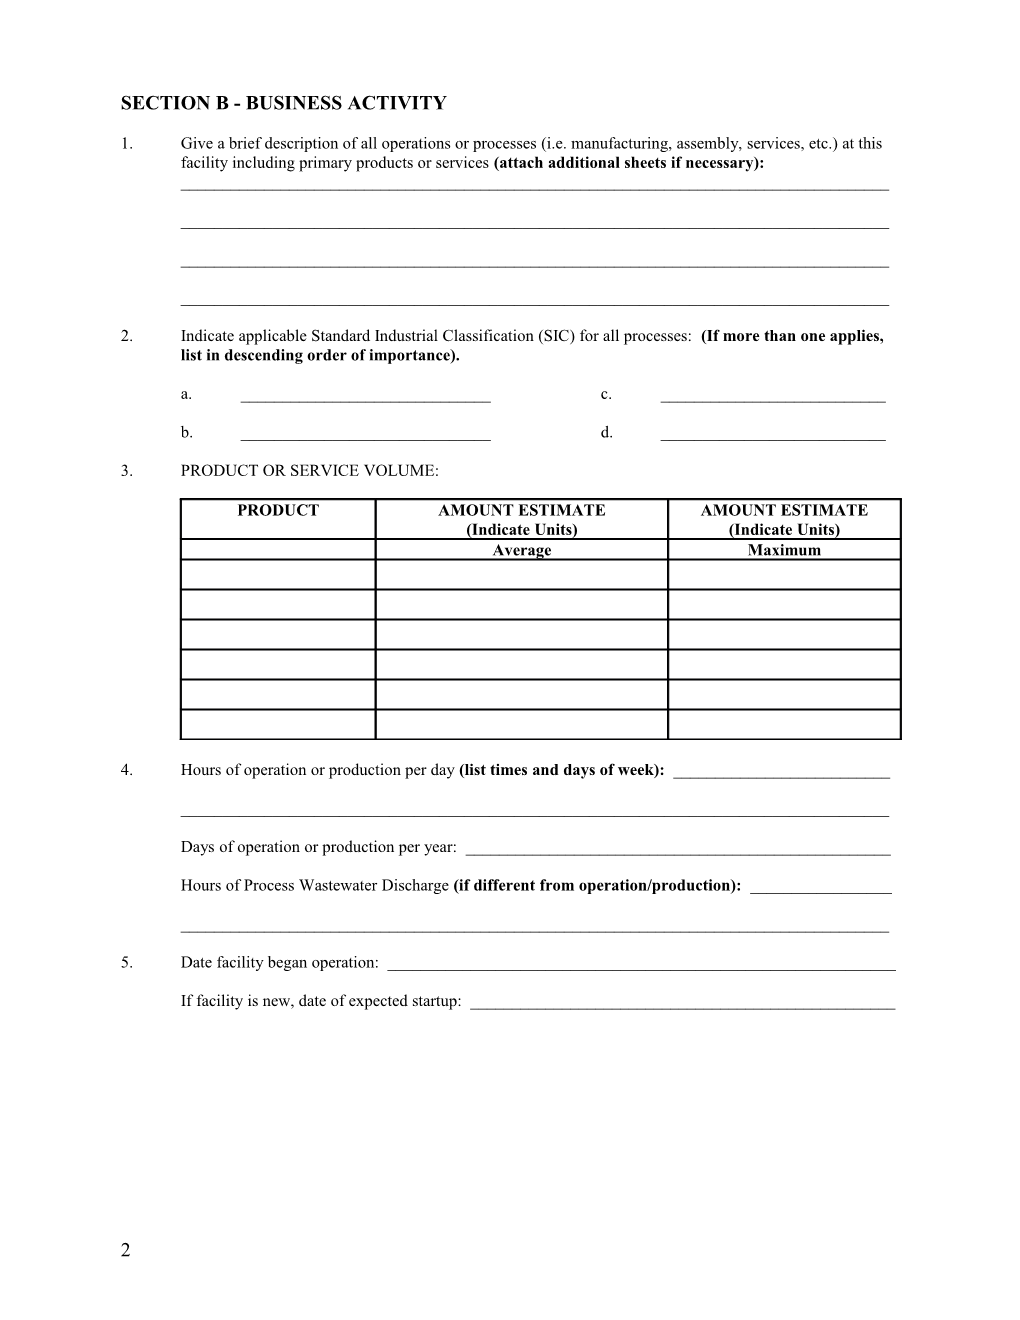 Instructions to Fill Out